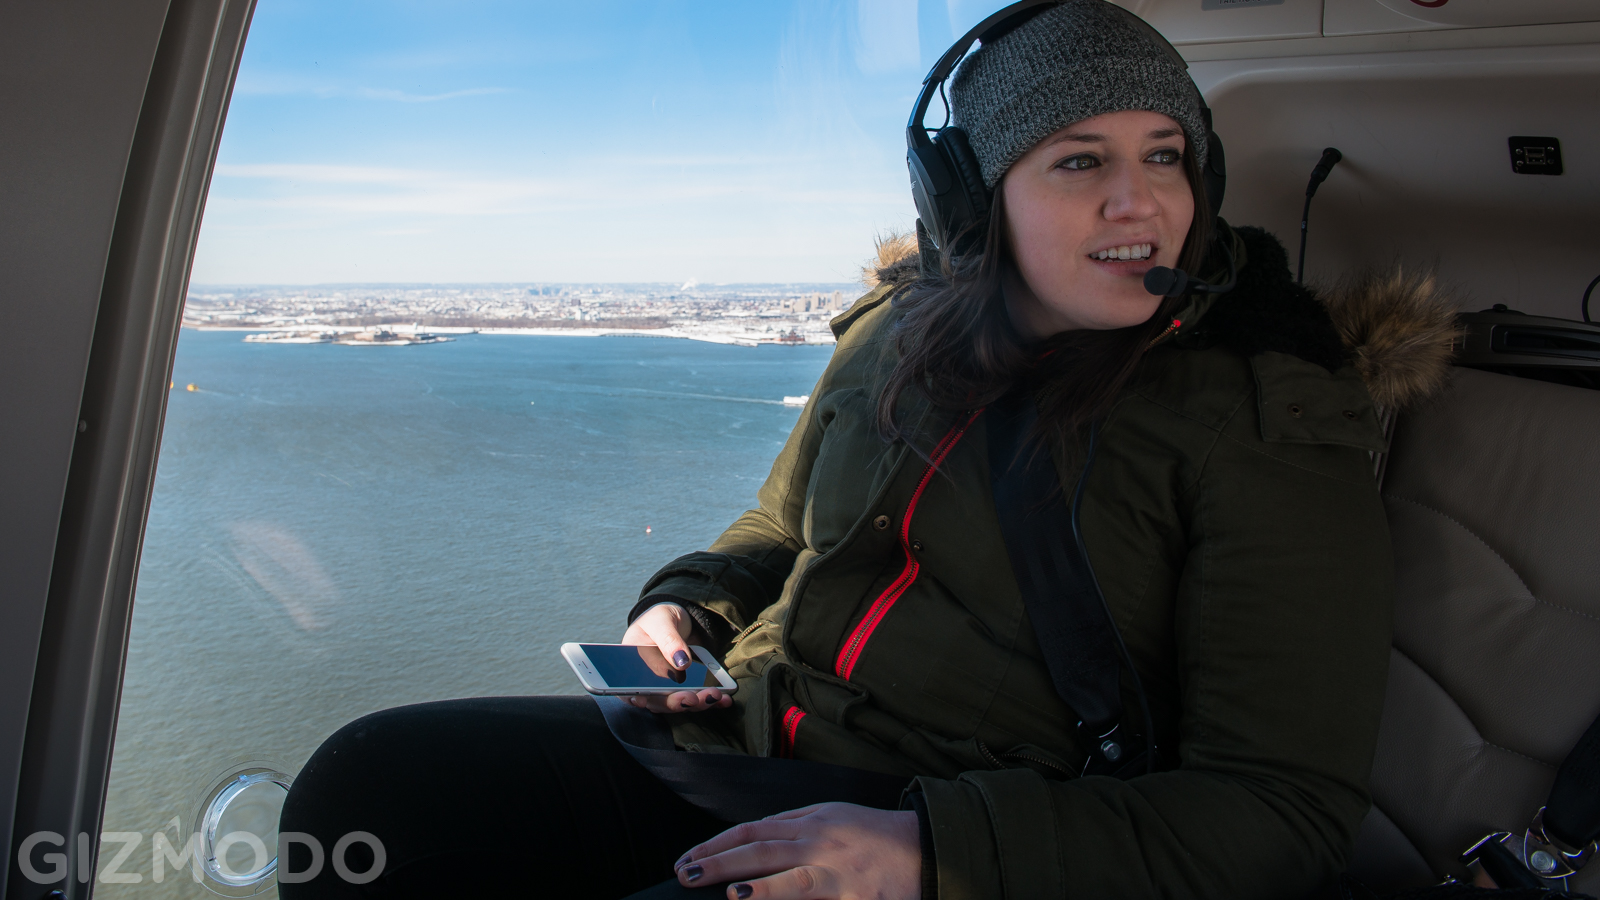 ‘Uber For Helicopters’ Is Gross, Absurd, And I Want To Use It Every Day